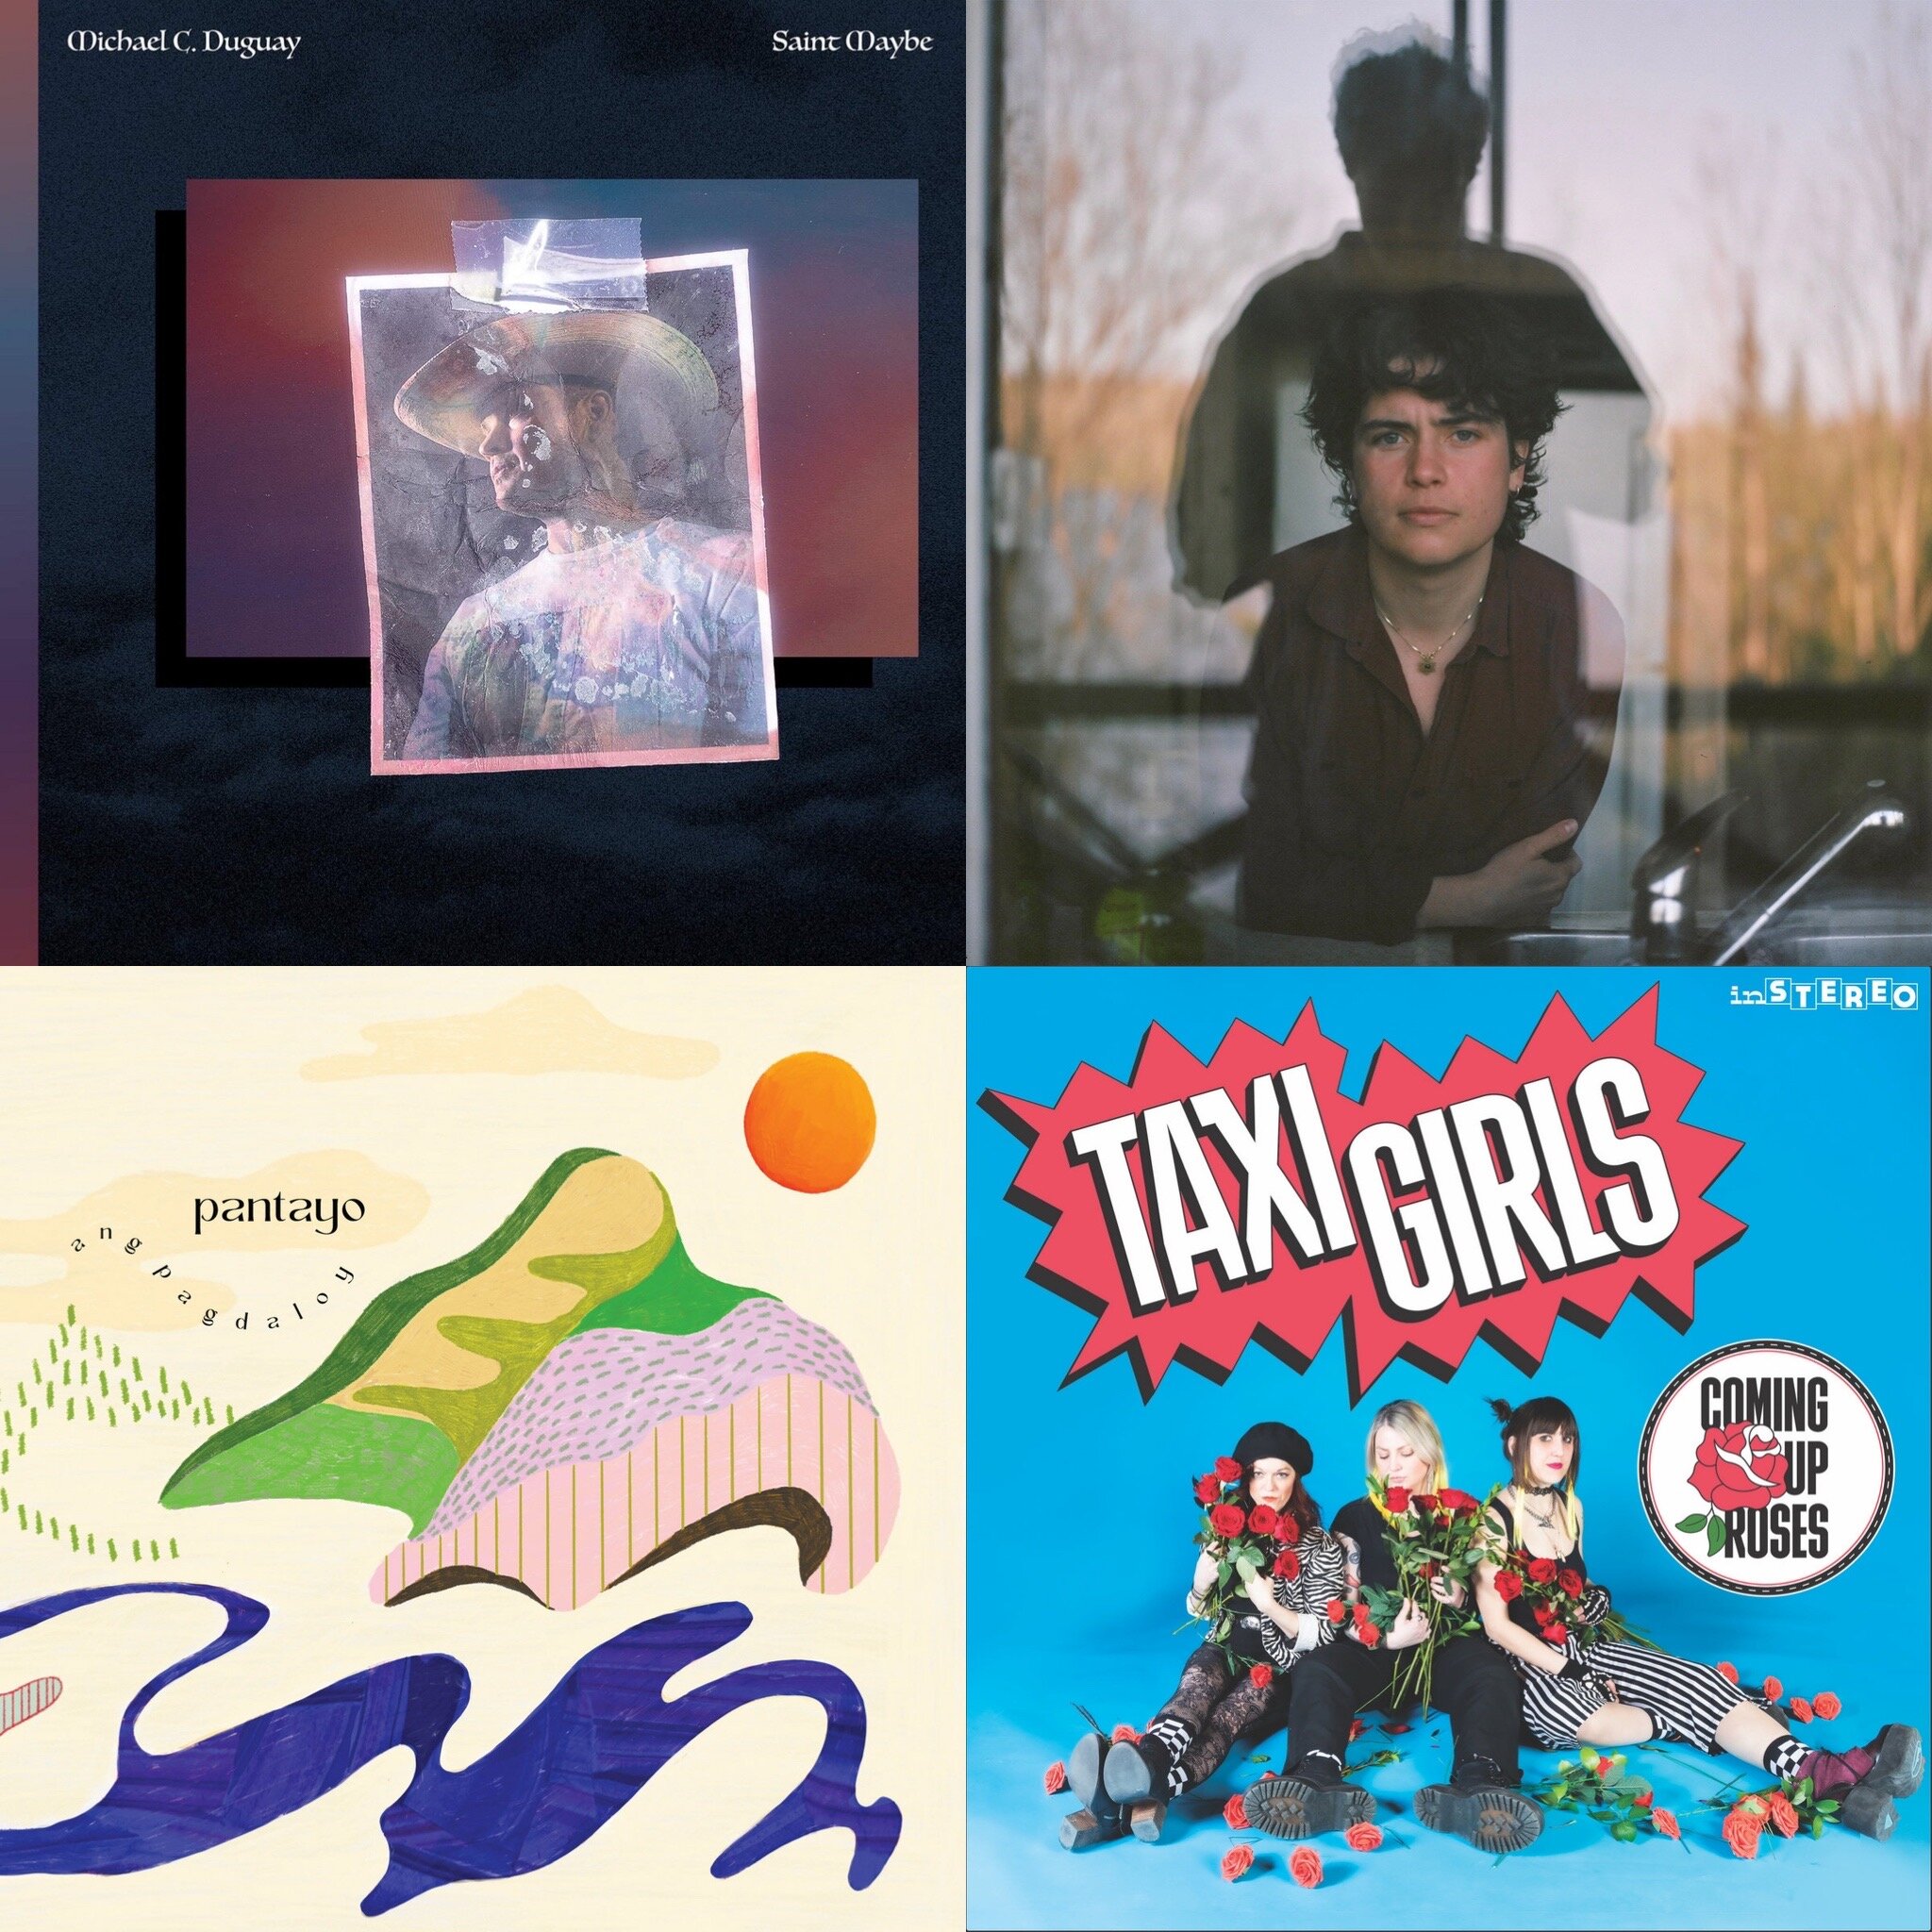 New Quick Picks!

Branton Langley reviews new releases from @michaelcduguay, @bellslarsen, @pantayomusic, and @taxigirlsmontreal.

Read/listen/support: cupsncakespod.com (working link in bio)

#canadianmusic #newmusic #musicmedia #indiemusic #indie #